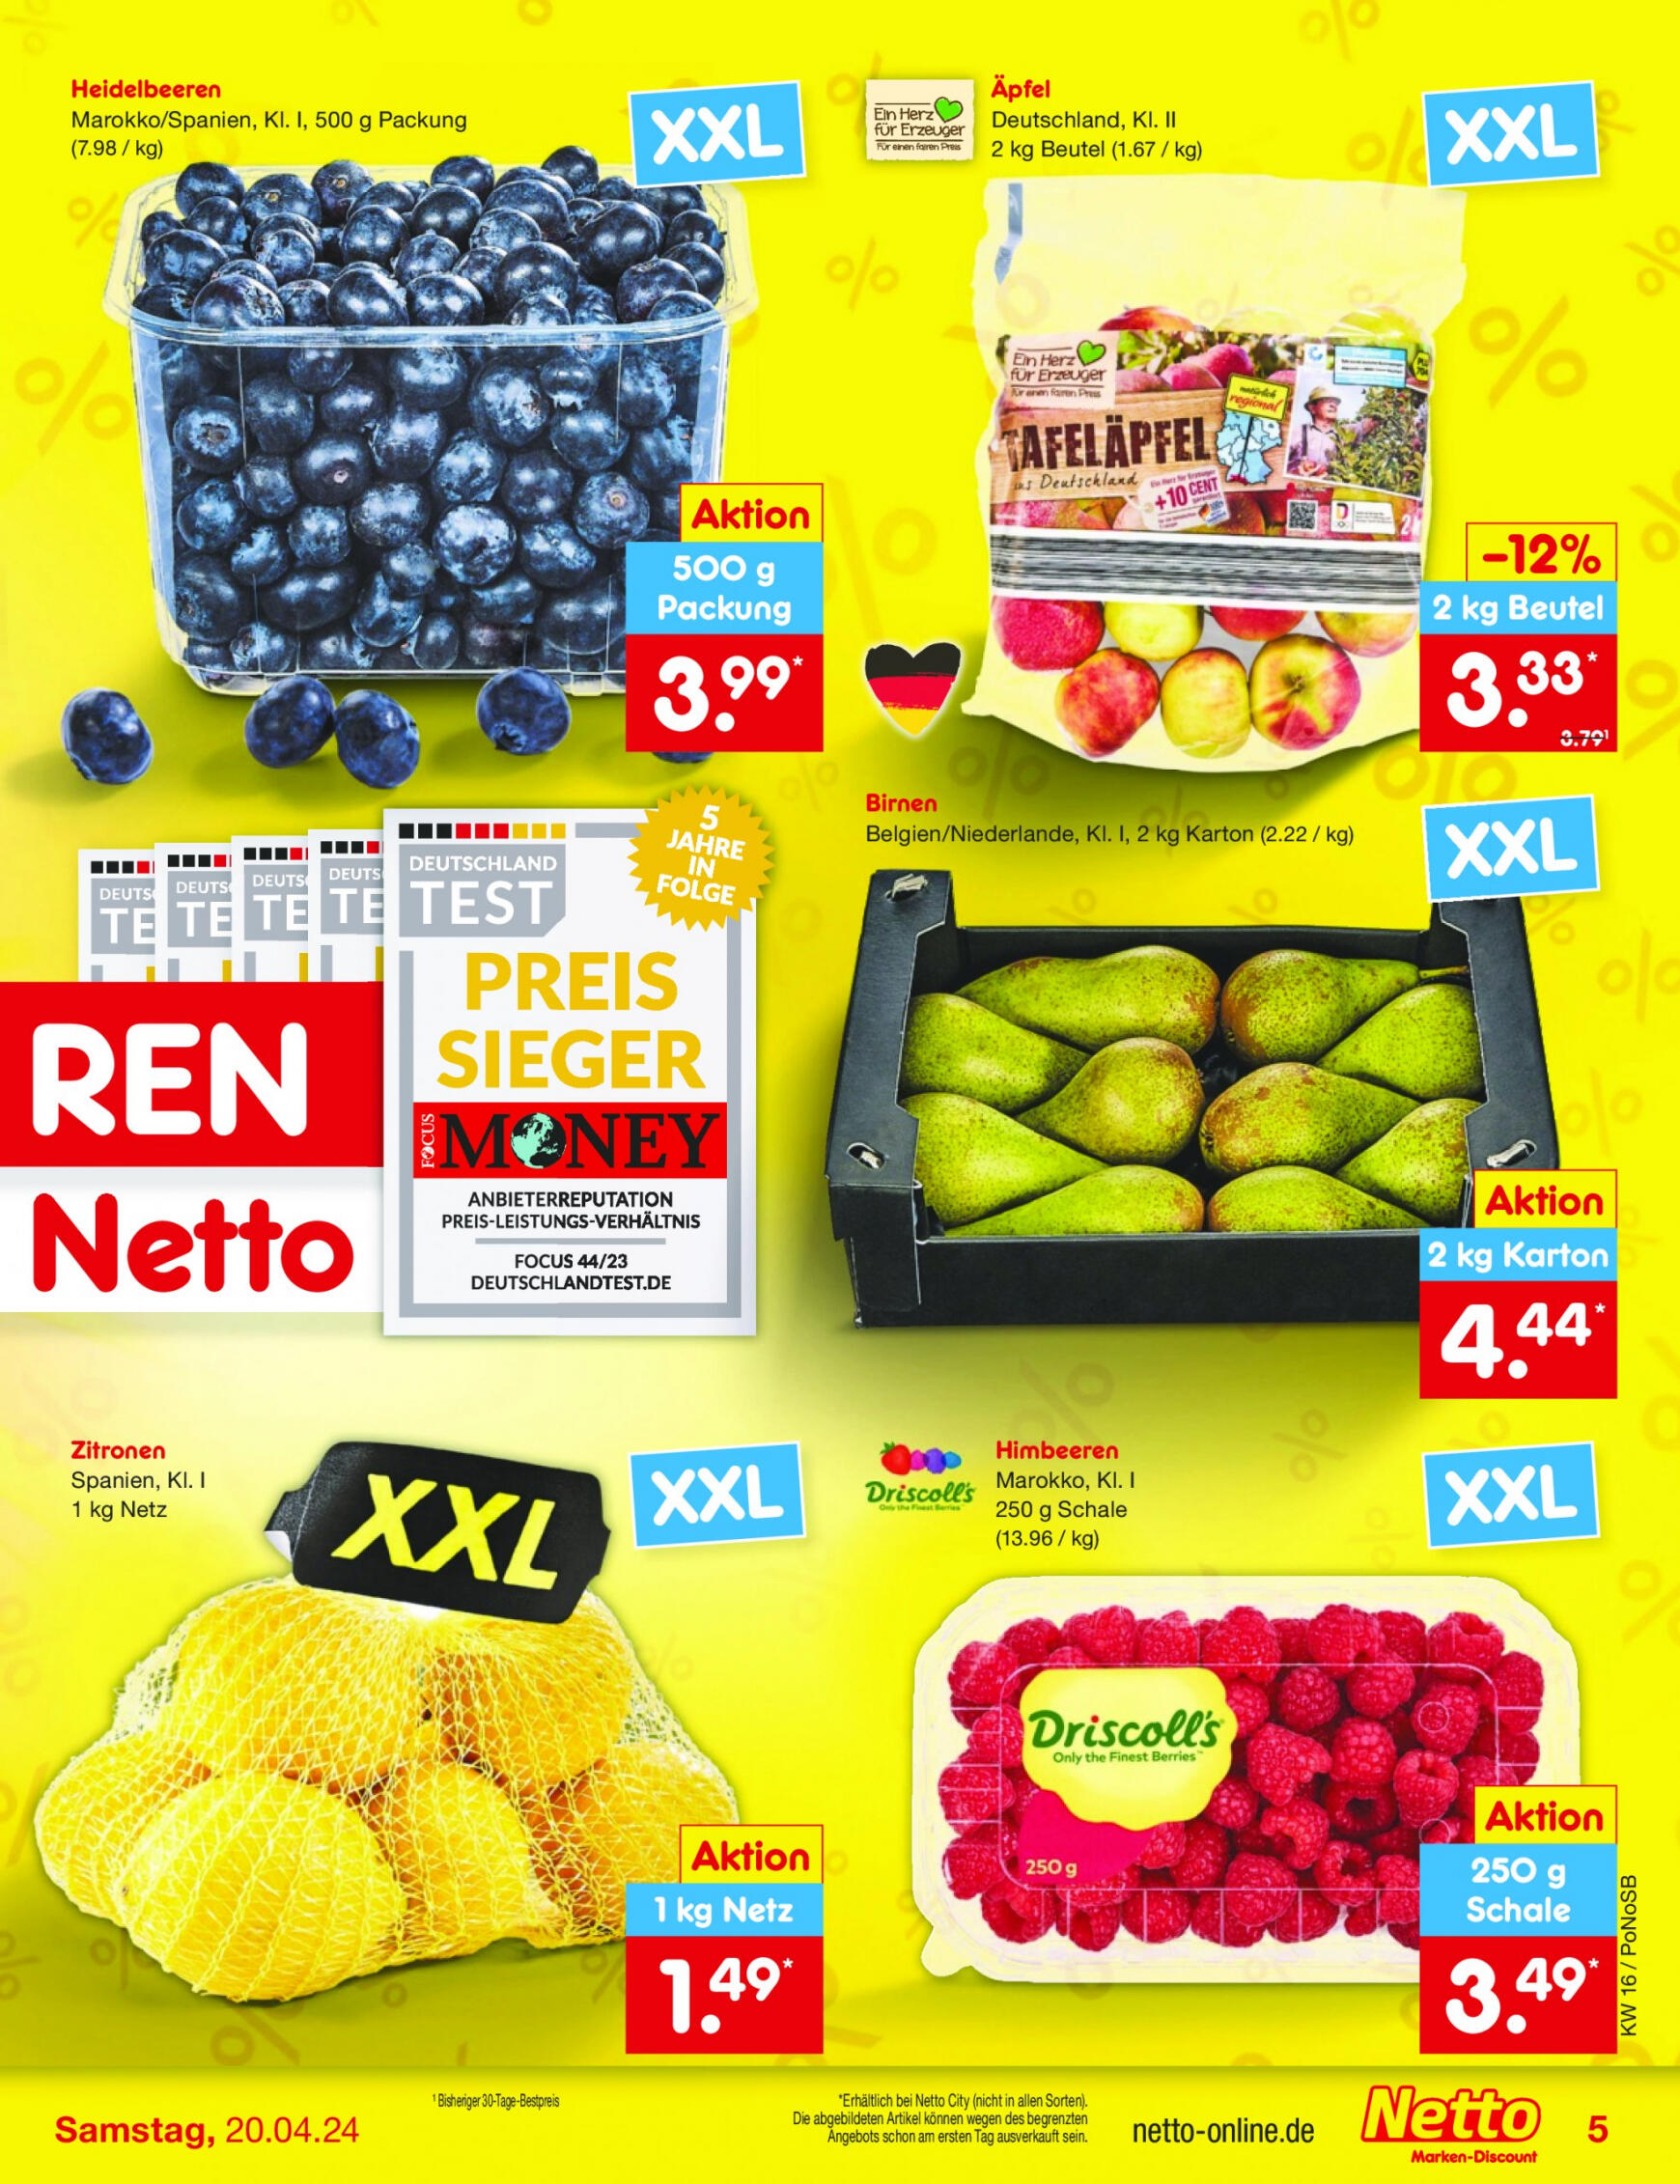 netto - Flyer Netto aktuell 15.04. - 20.04. - page: 5